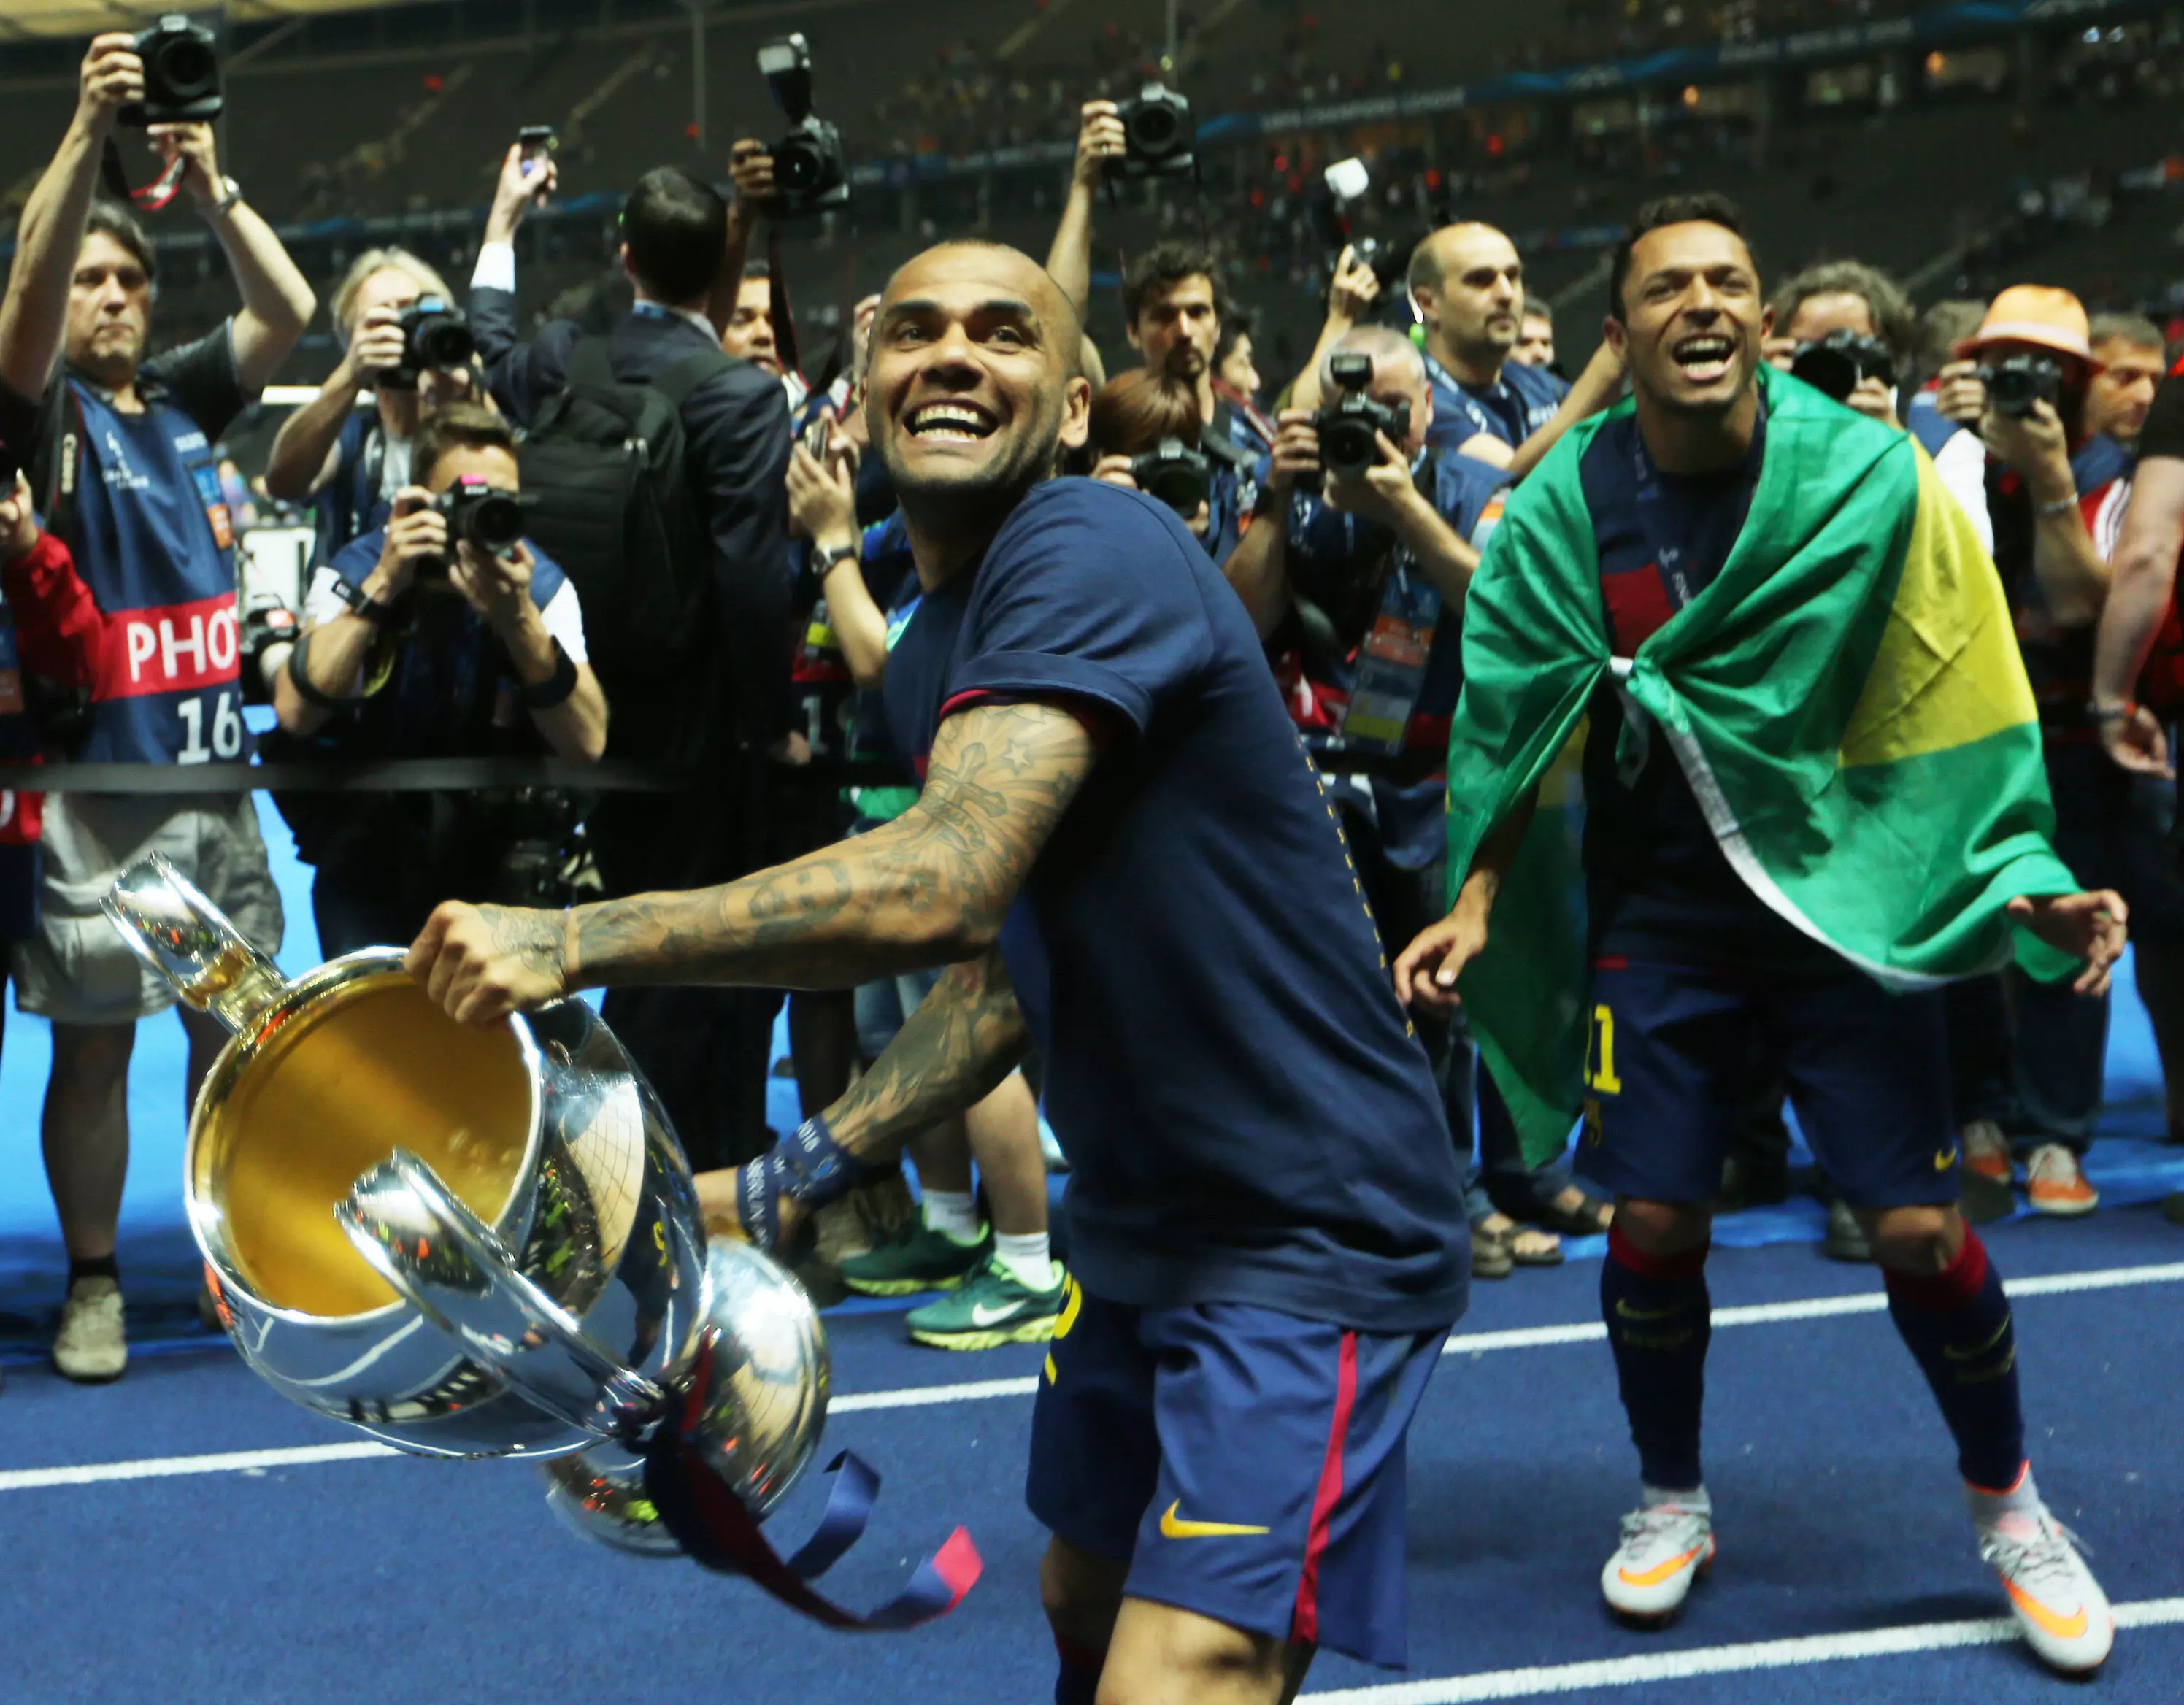 Alves winning the Champions League with Barcelona. Image: PA Images